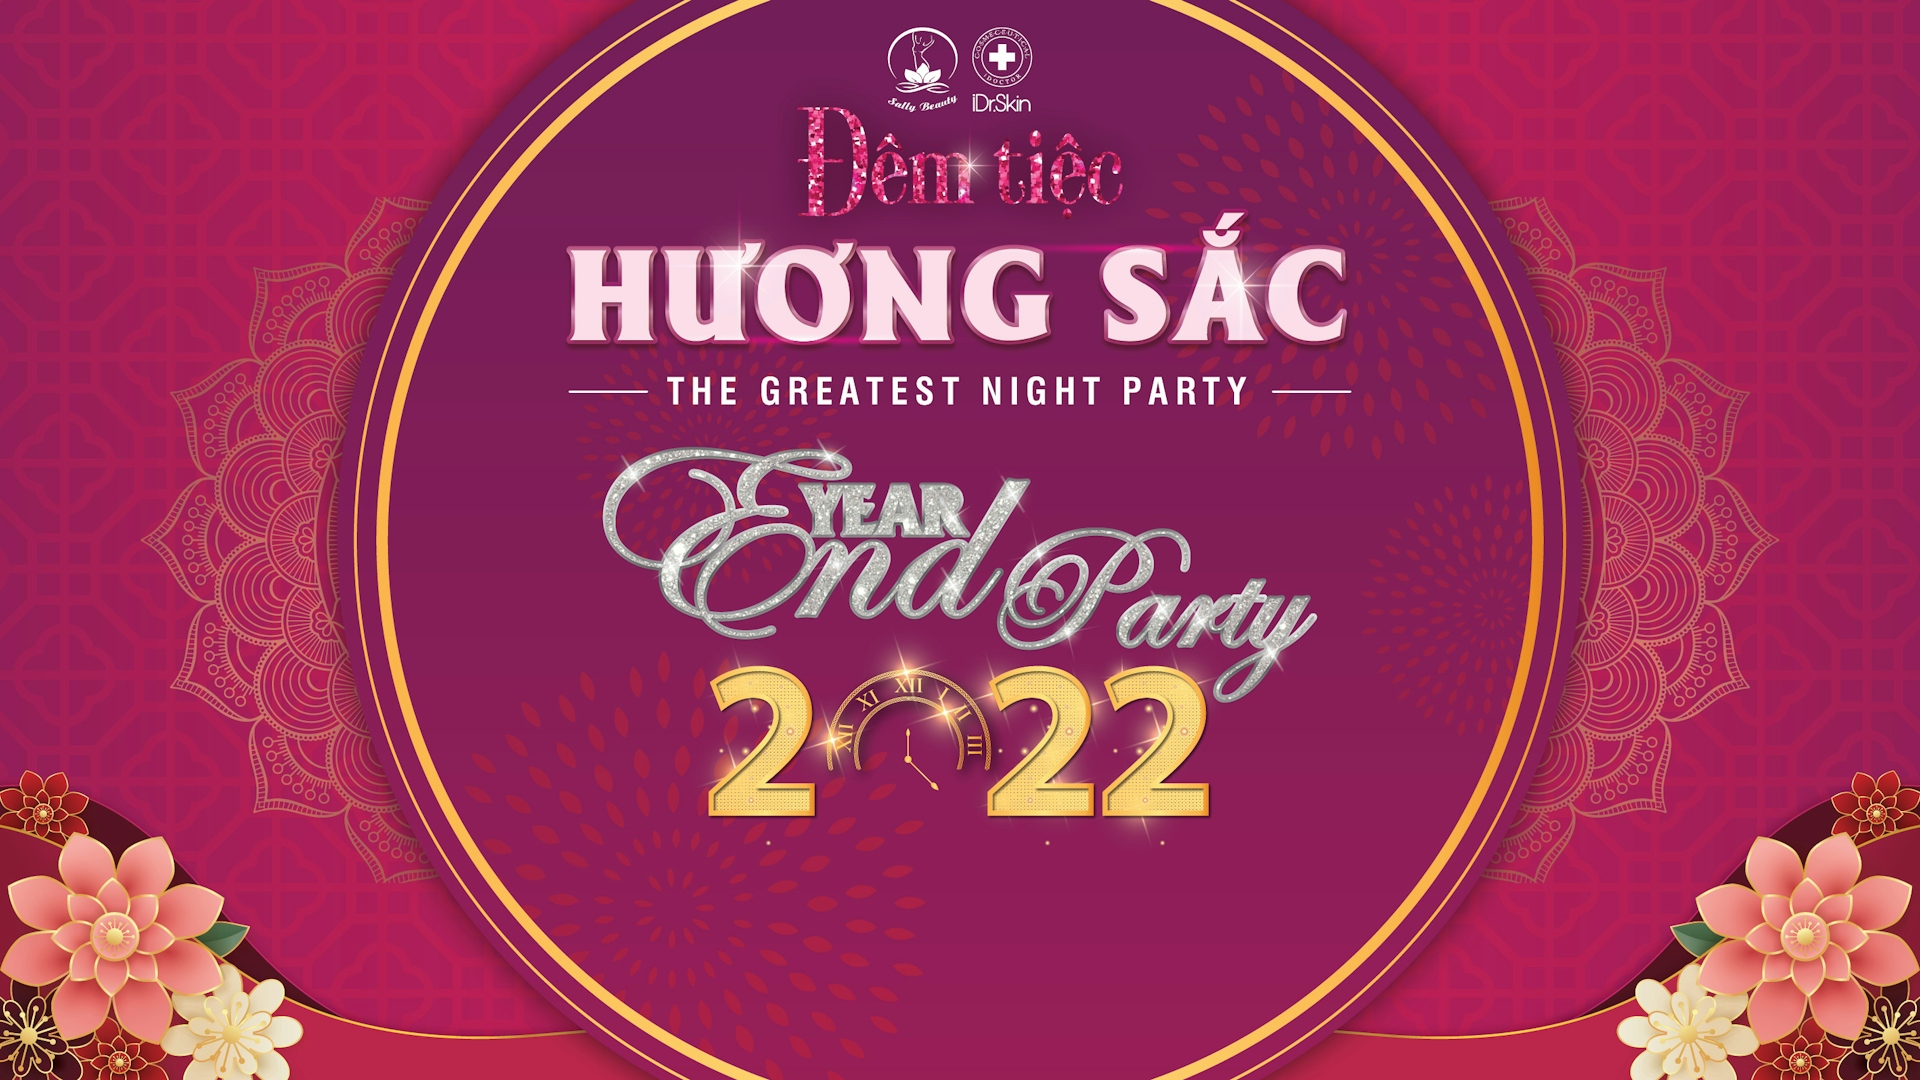 YEAR END PARTY 2022 - THE GREATEST NIGHT PARTY